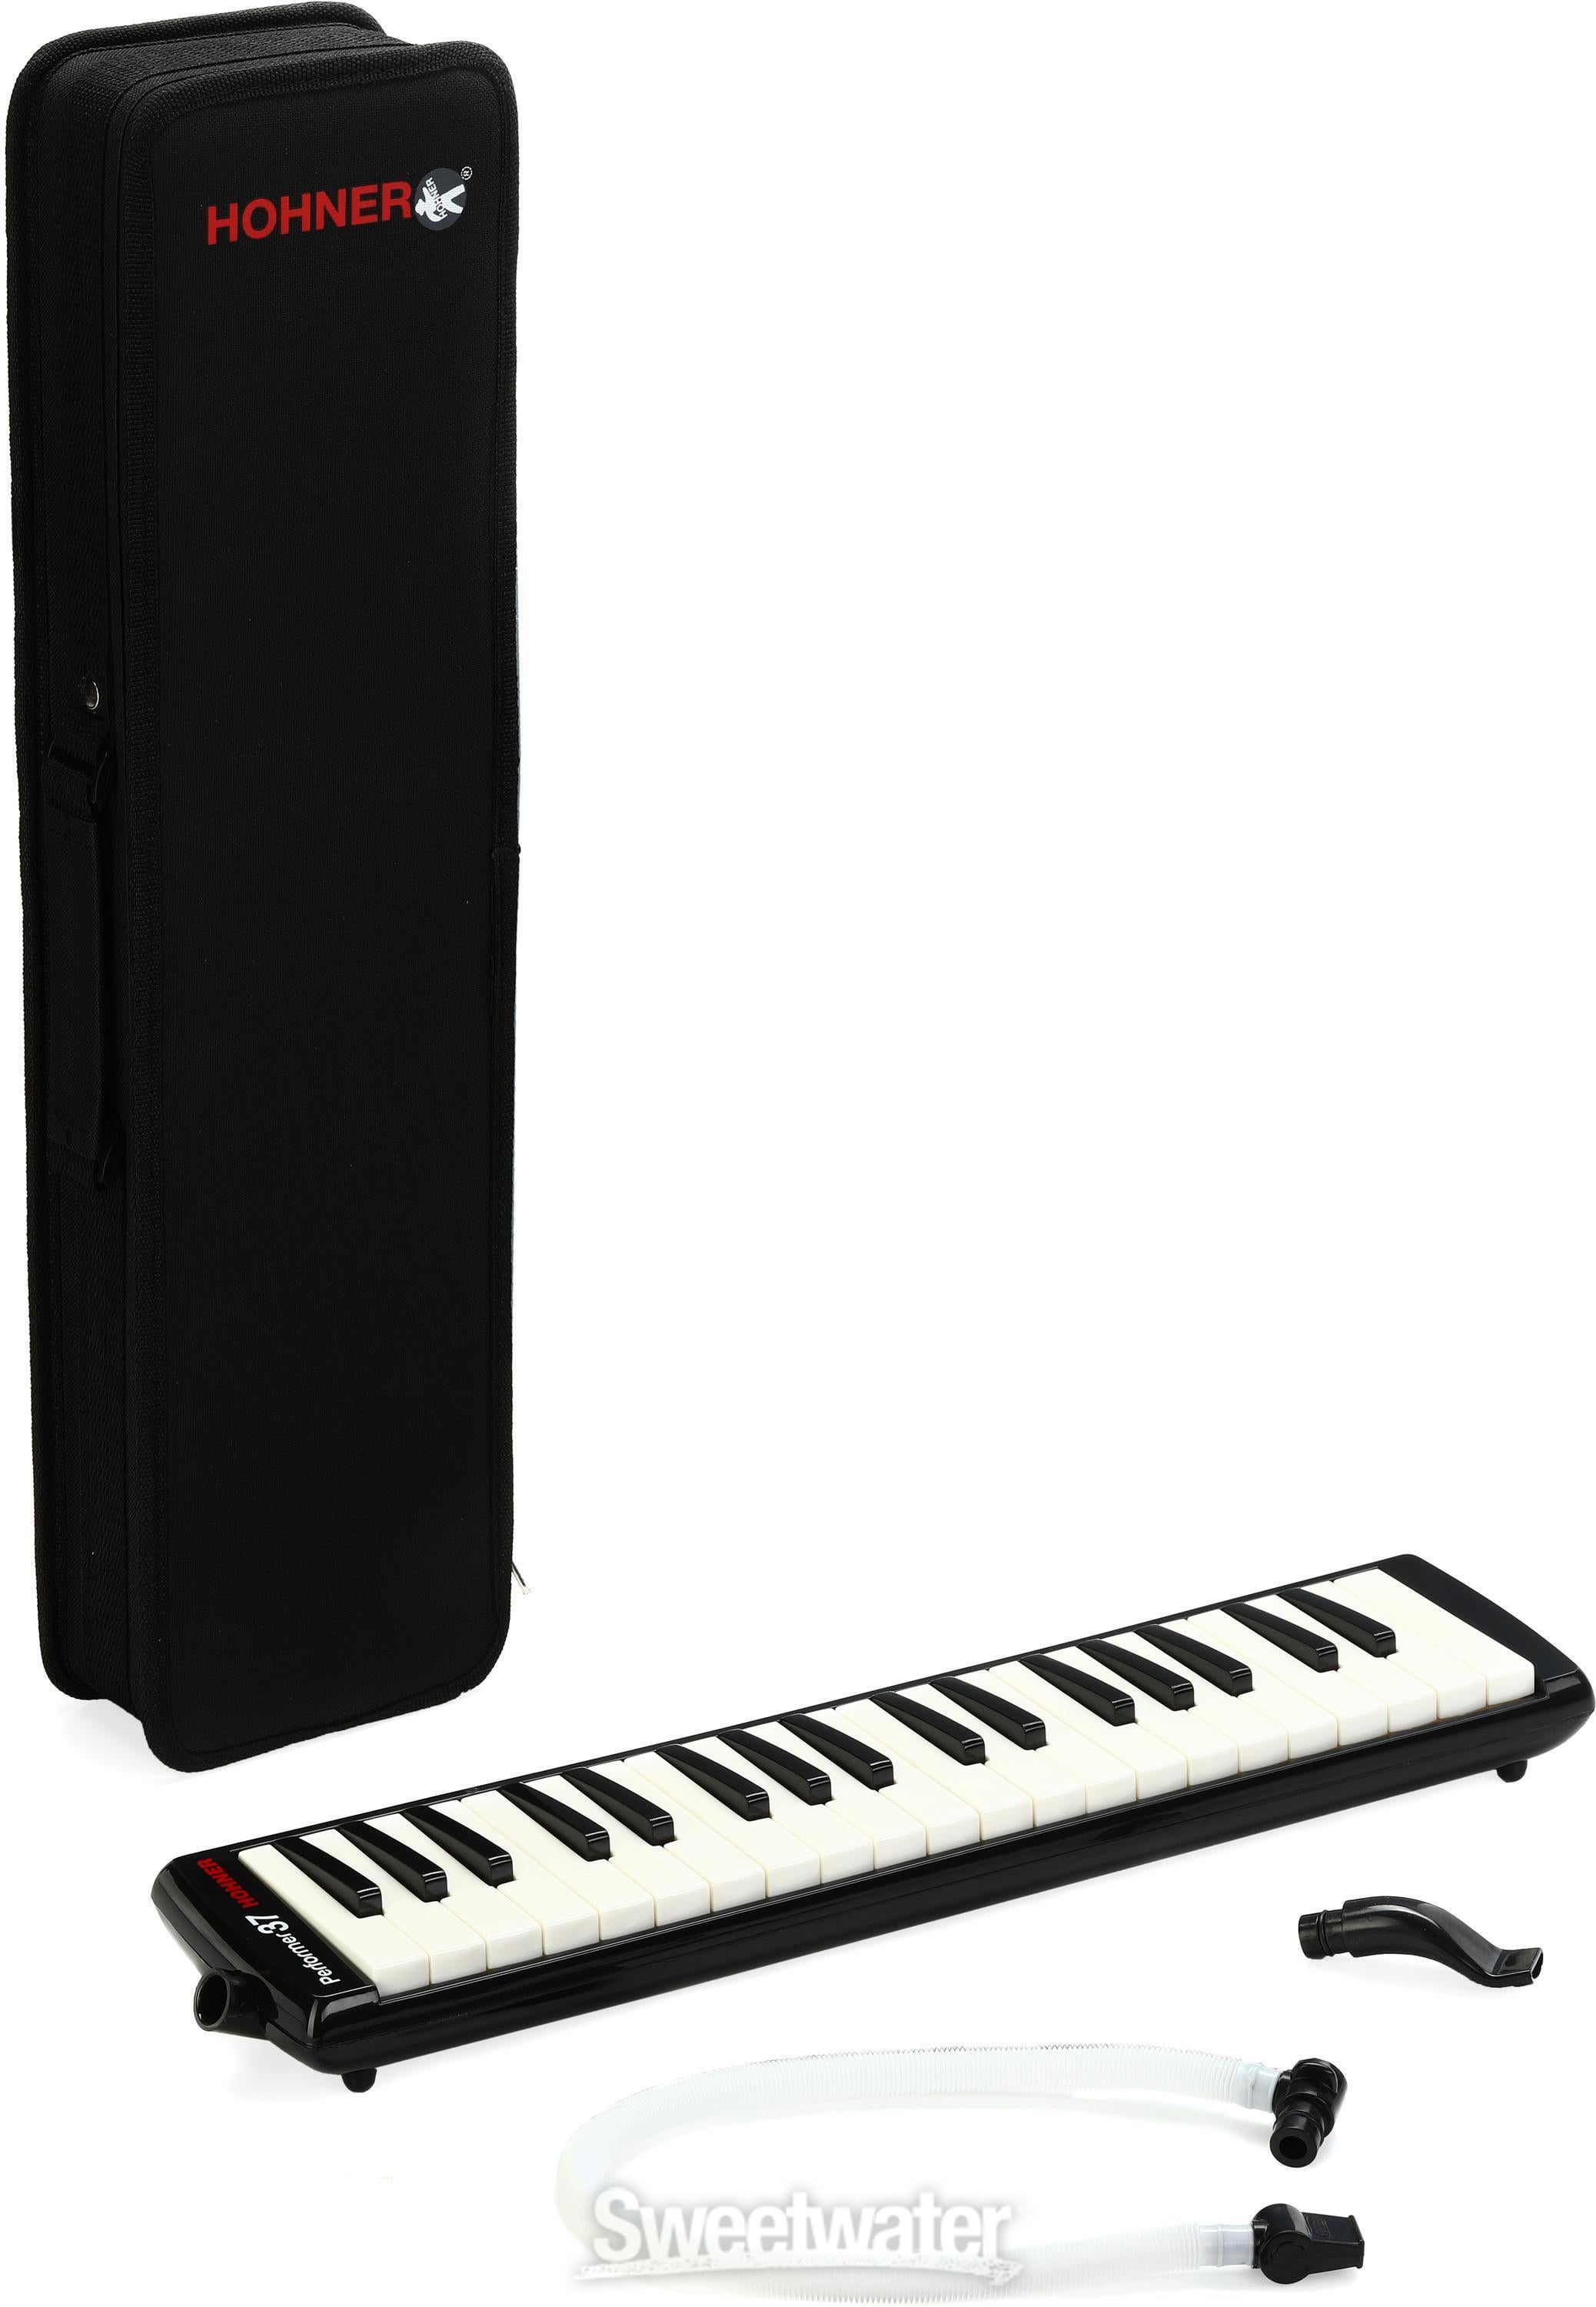 Hohner Performer 37-key Melodica - Black | Sweetwater